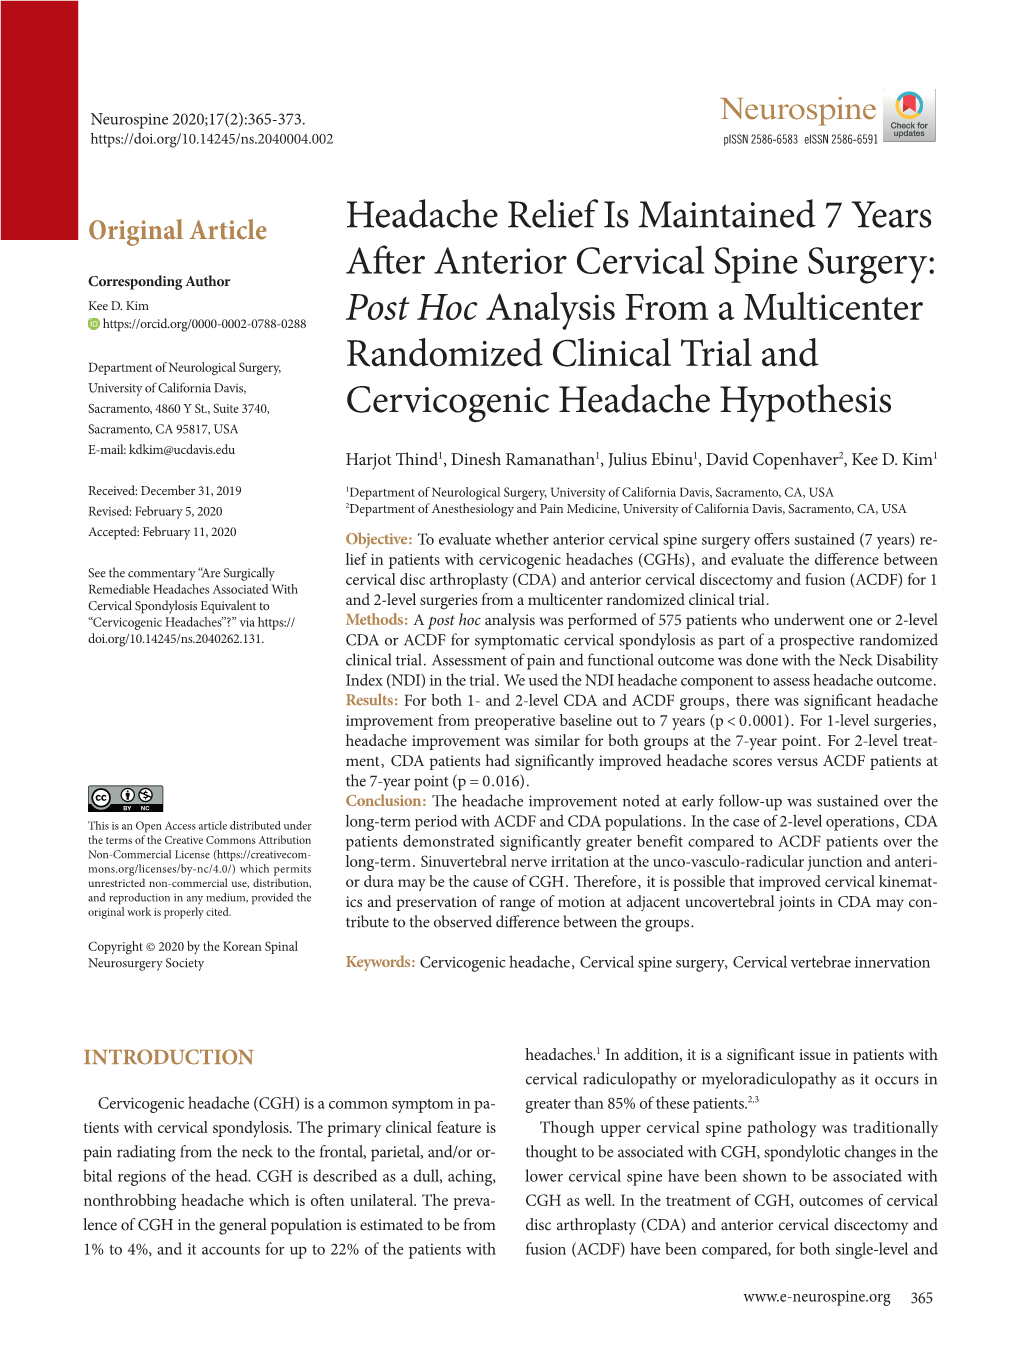 Headache Relief Is Maintained 7 Years After Anterior Cervical Spine Surgery